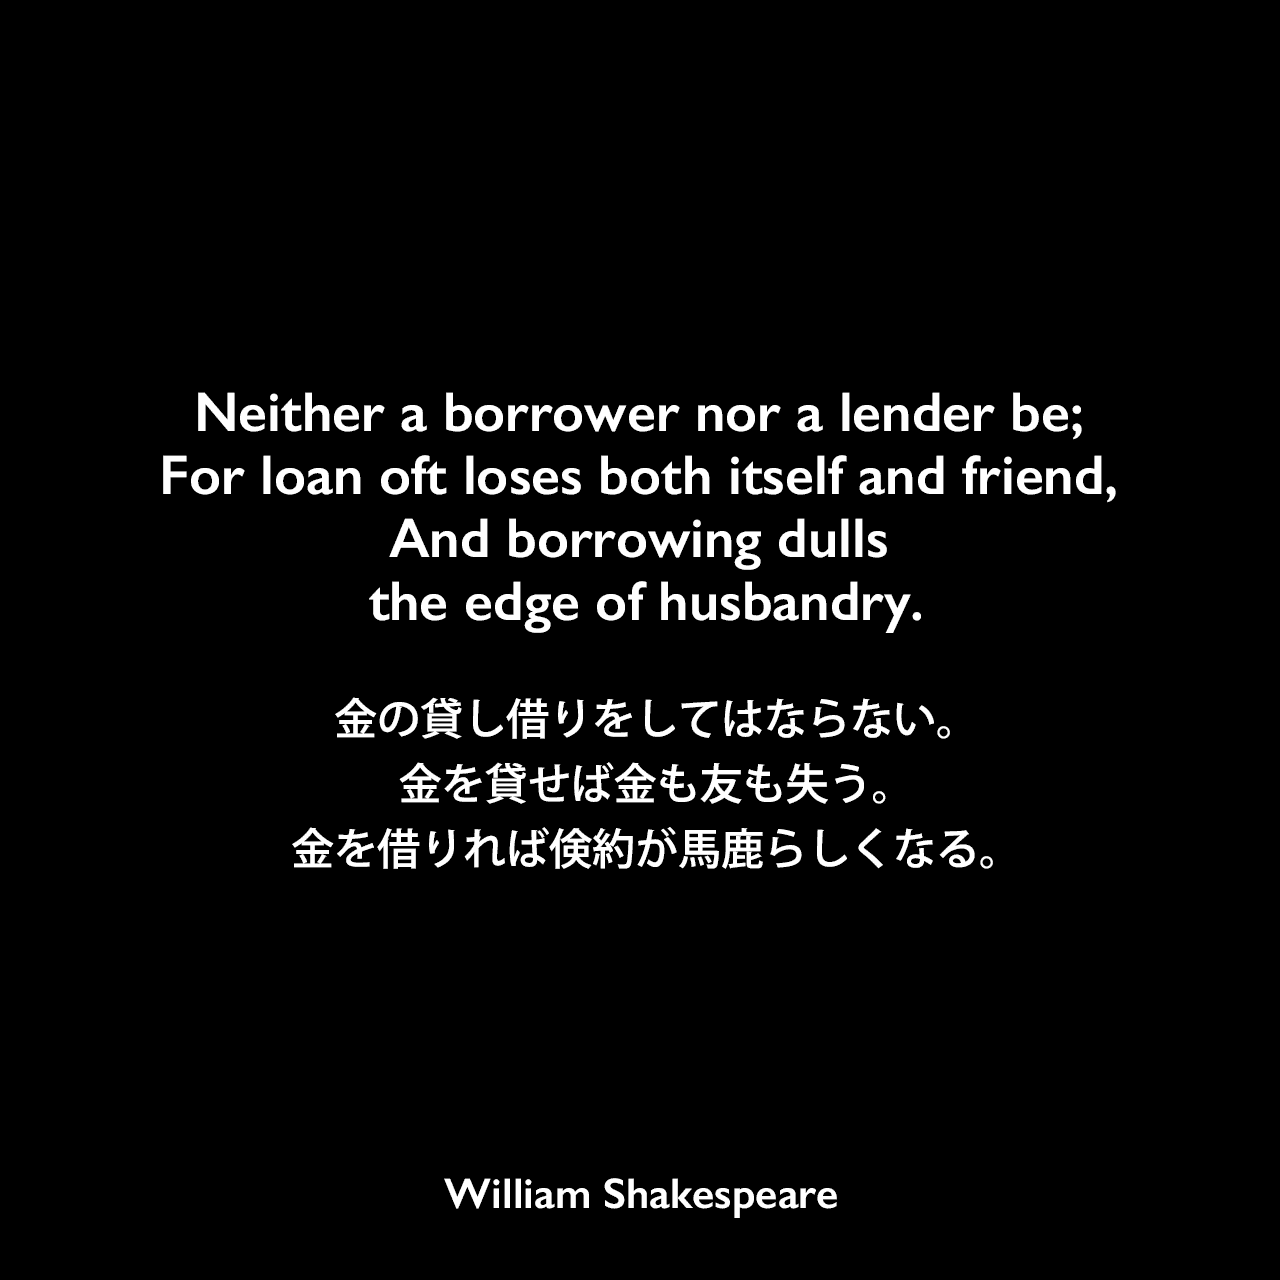 Neither a borrower nor a lender be; For loan oft loses both itself and friend, And borrowing dulls the edge of husbandry.金の貸し借りをしてはならない。金を貸せば金も友も失う。金を借りれば倹約が馬鹿らしくなる。William Shakespeare